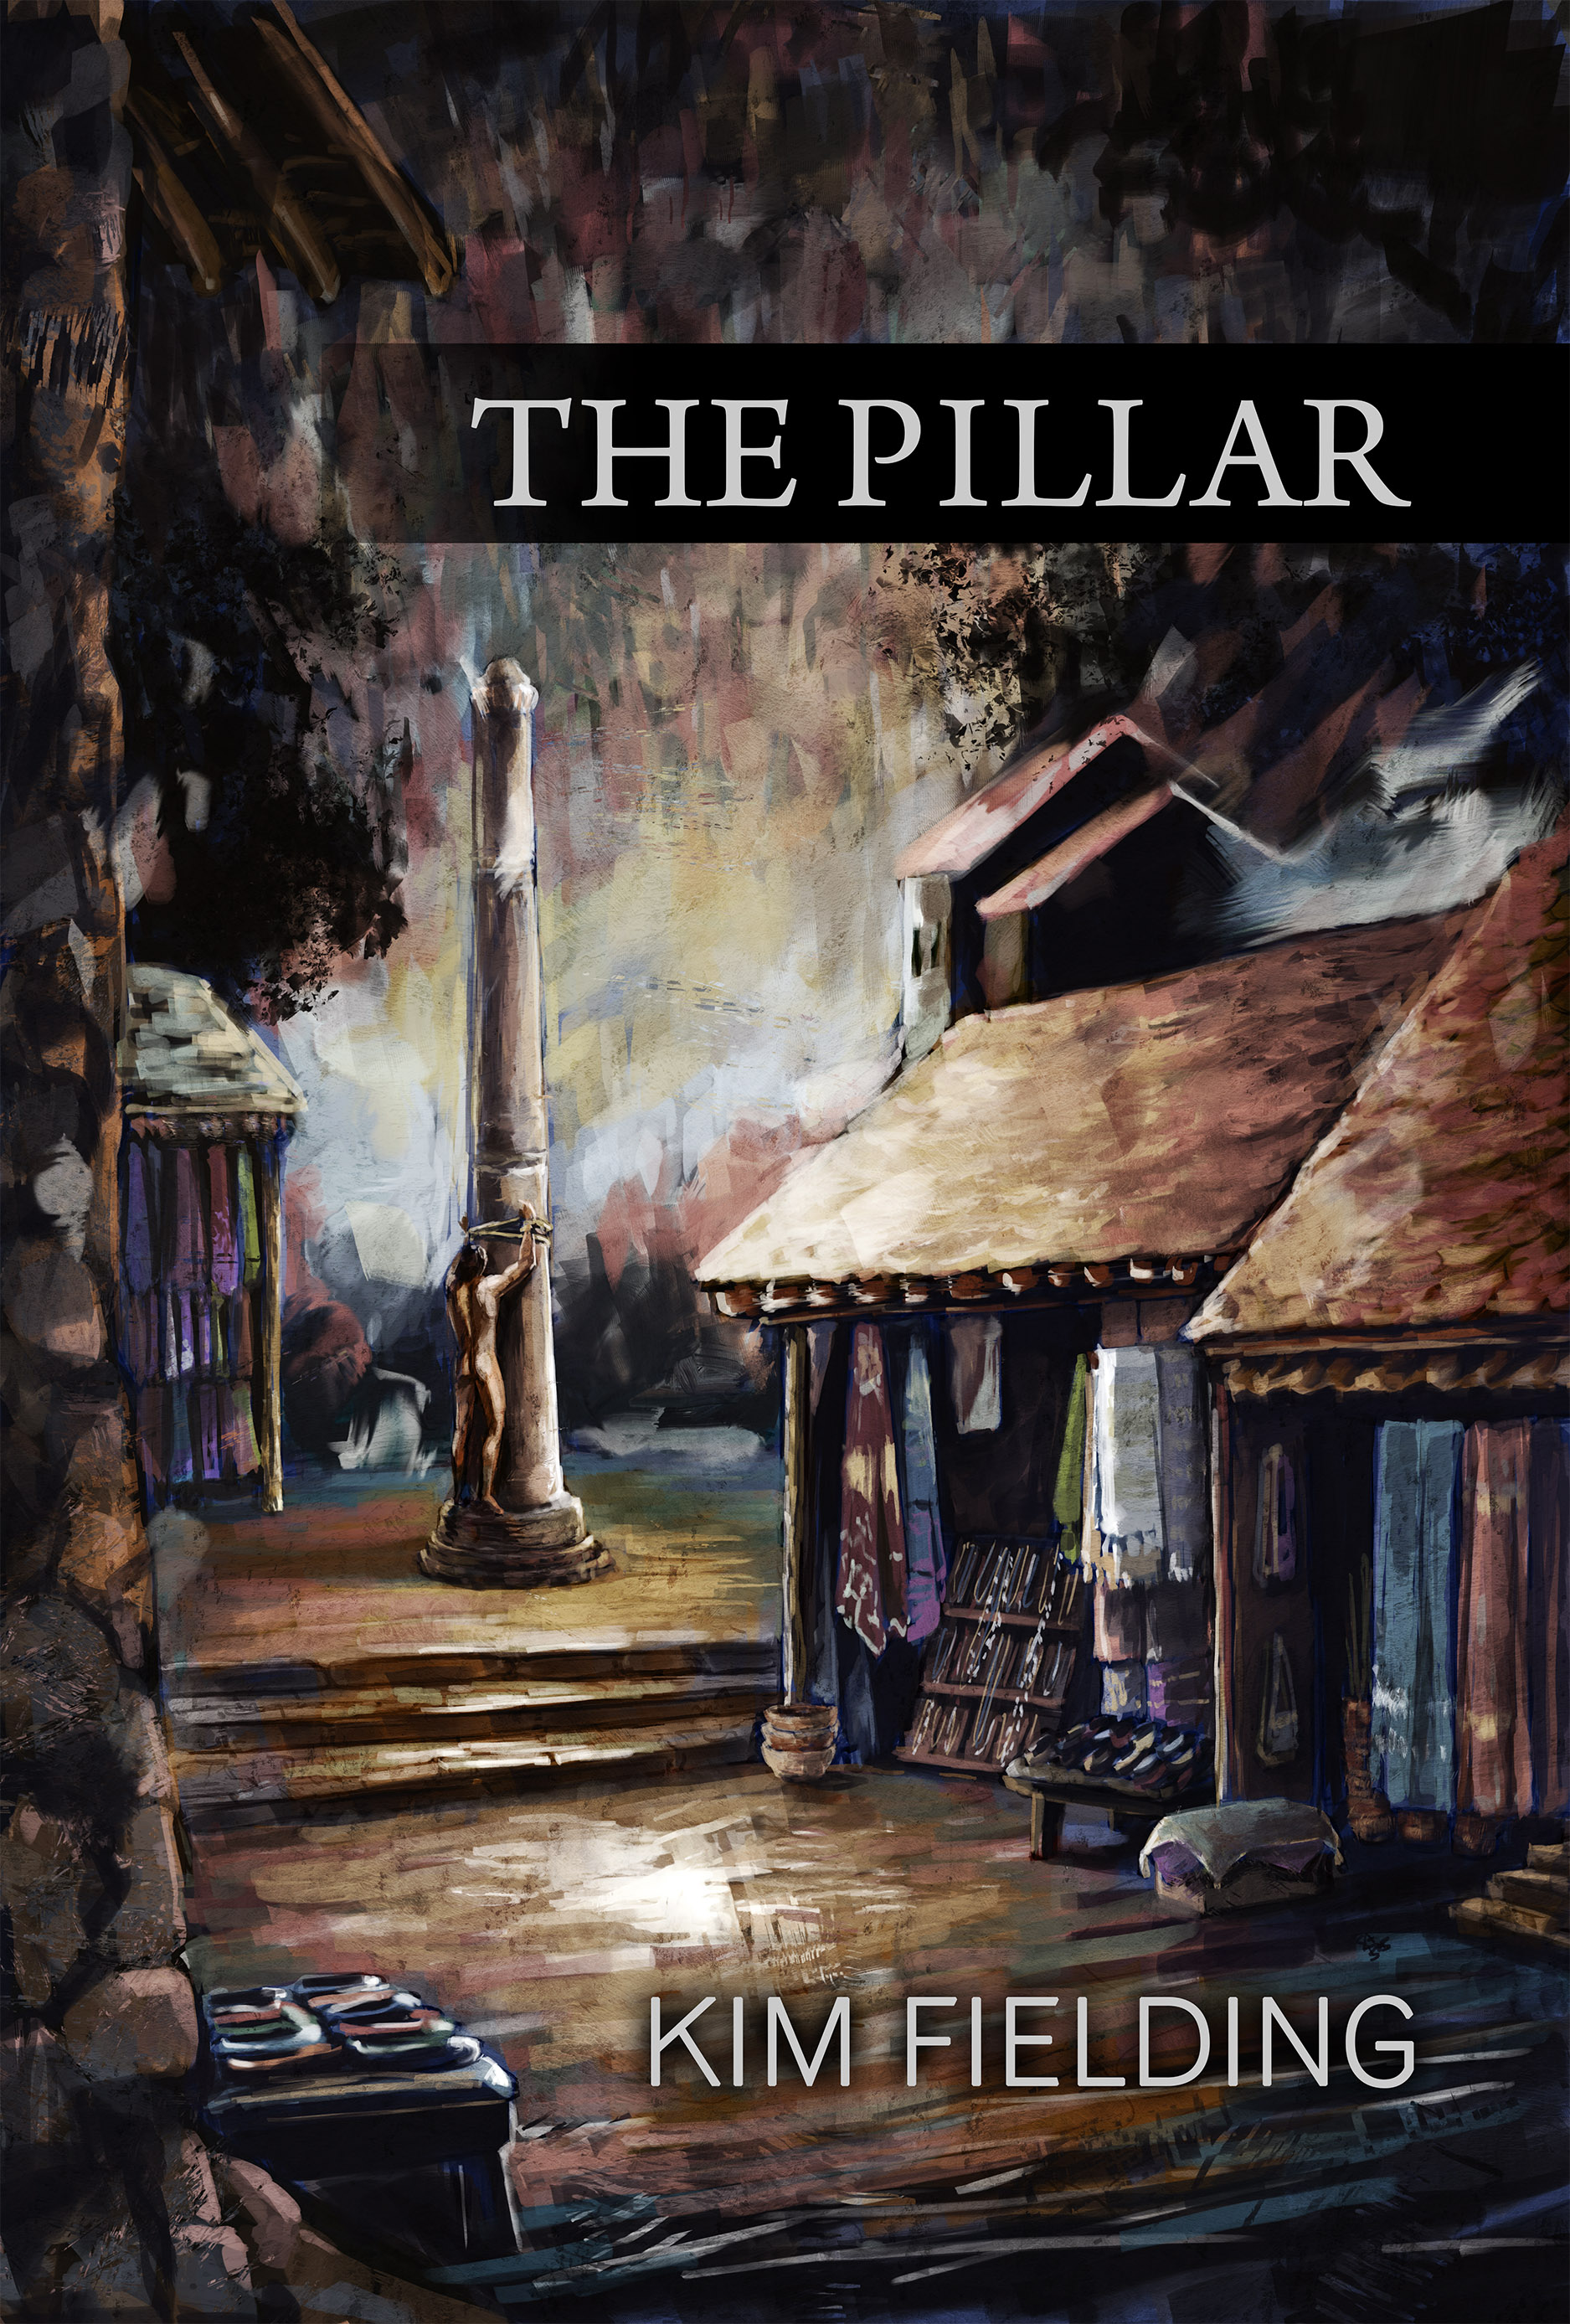 The Pillar Release Day — and Contest!